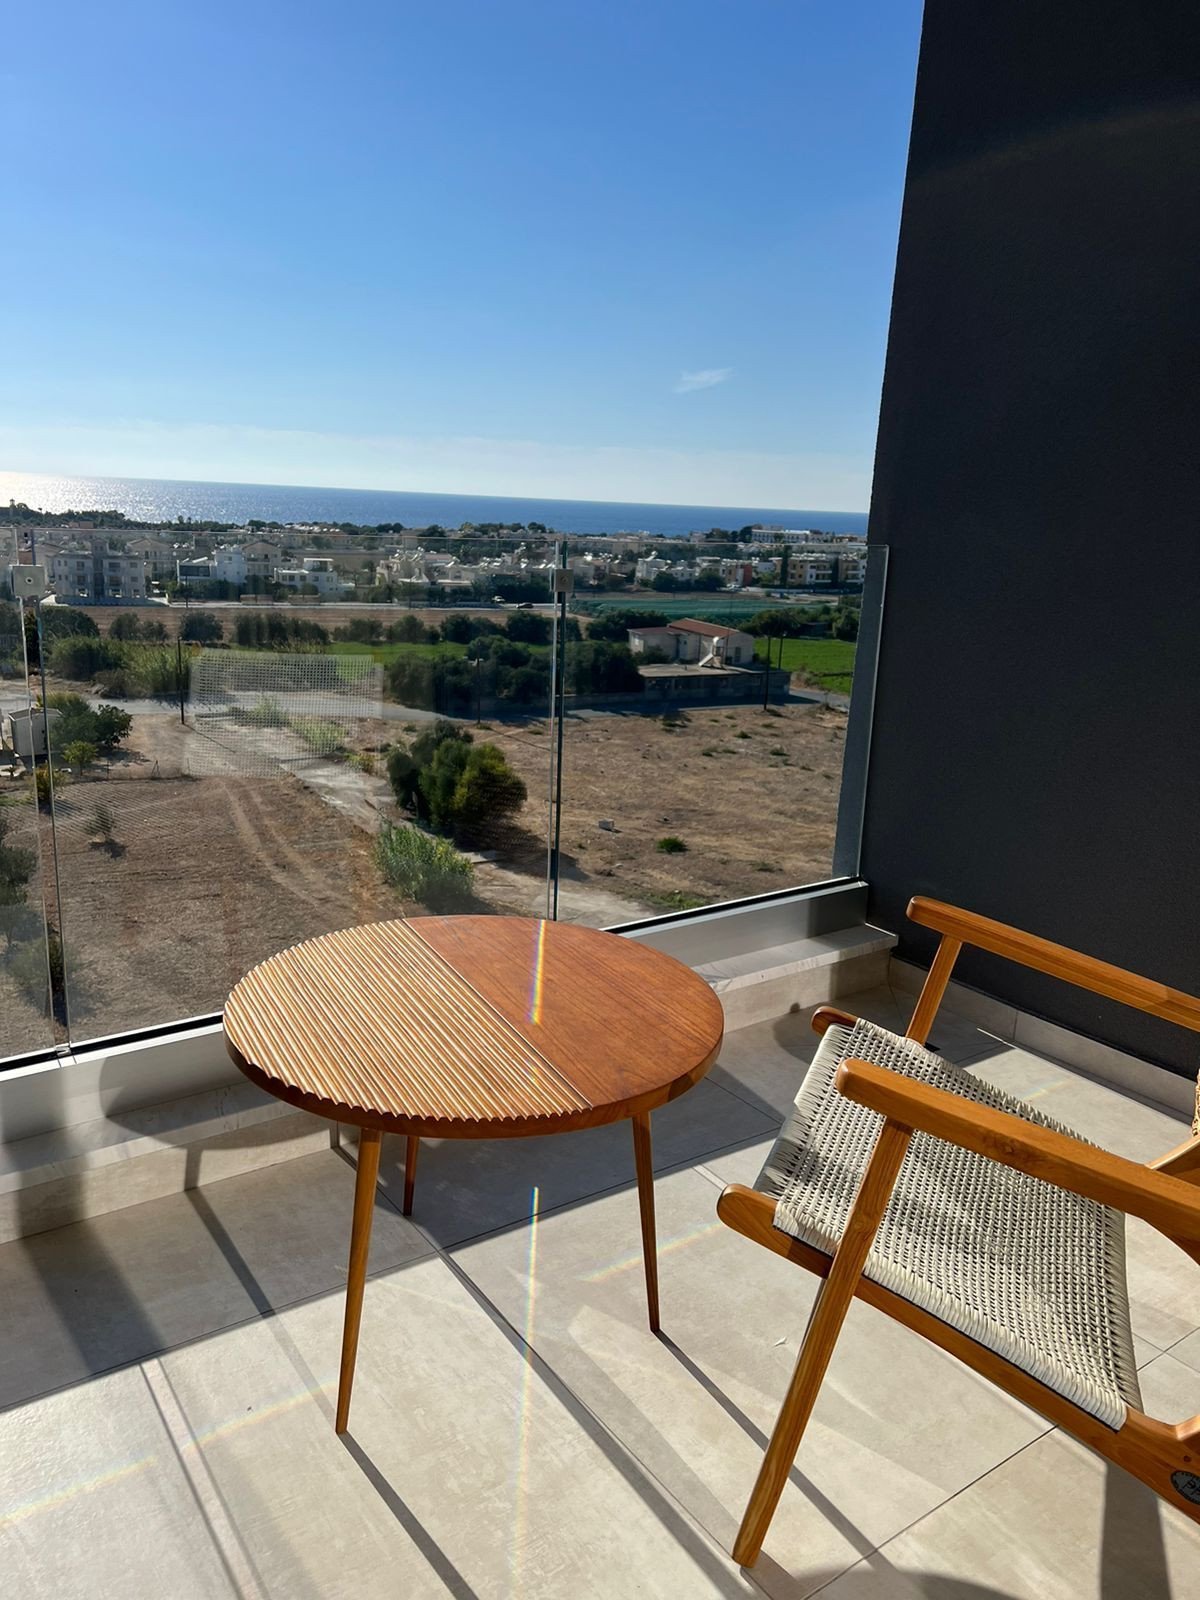 Property for Sale: Apartment (Penthouse) in City Center, Paphos  | Key Realtor Cyprus